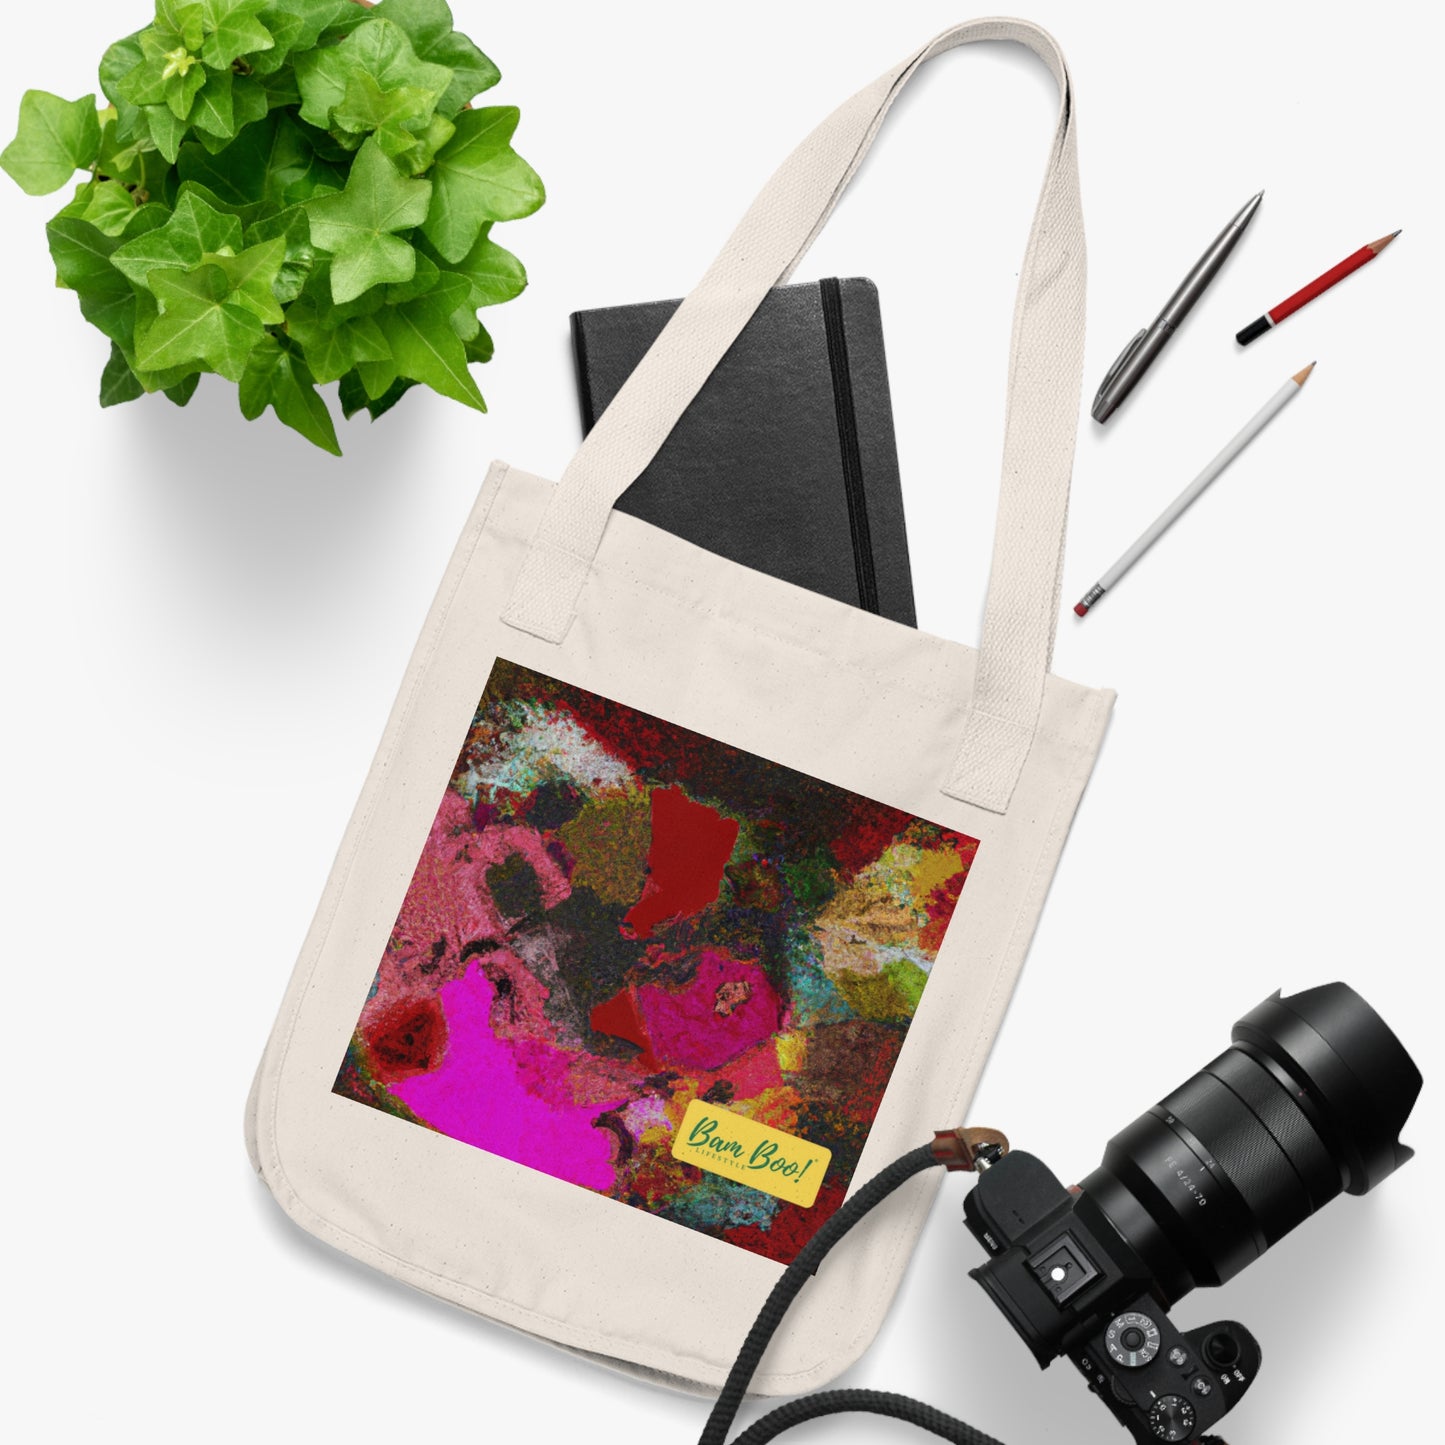 "Interplay of Emotion: Exploring Complementary Color and Abstract Form Through Abstract Art" - Bam Boo! Lifestyle Eco-friendly Tote Bag